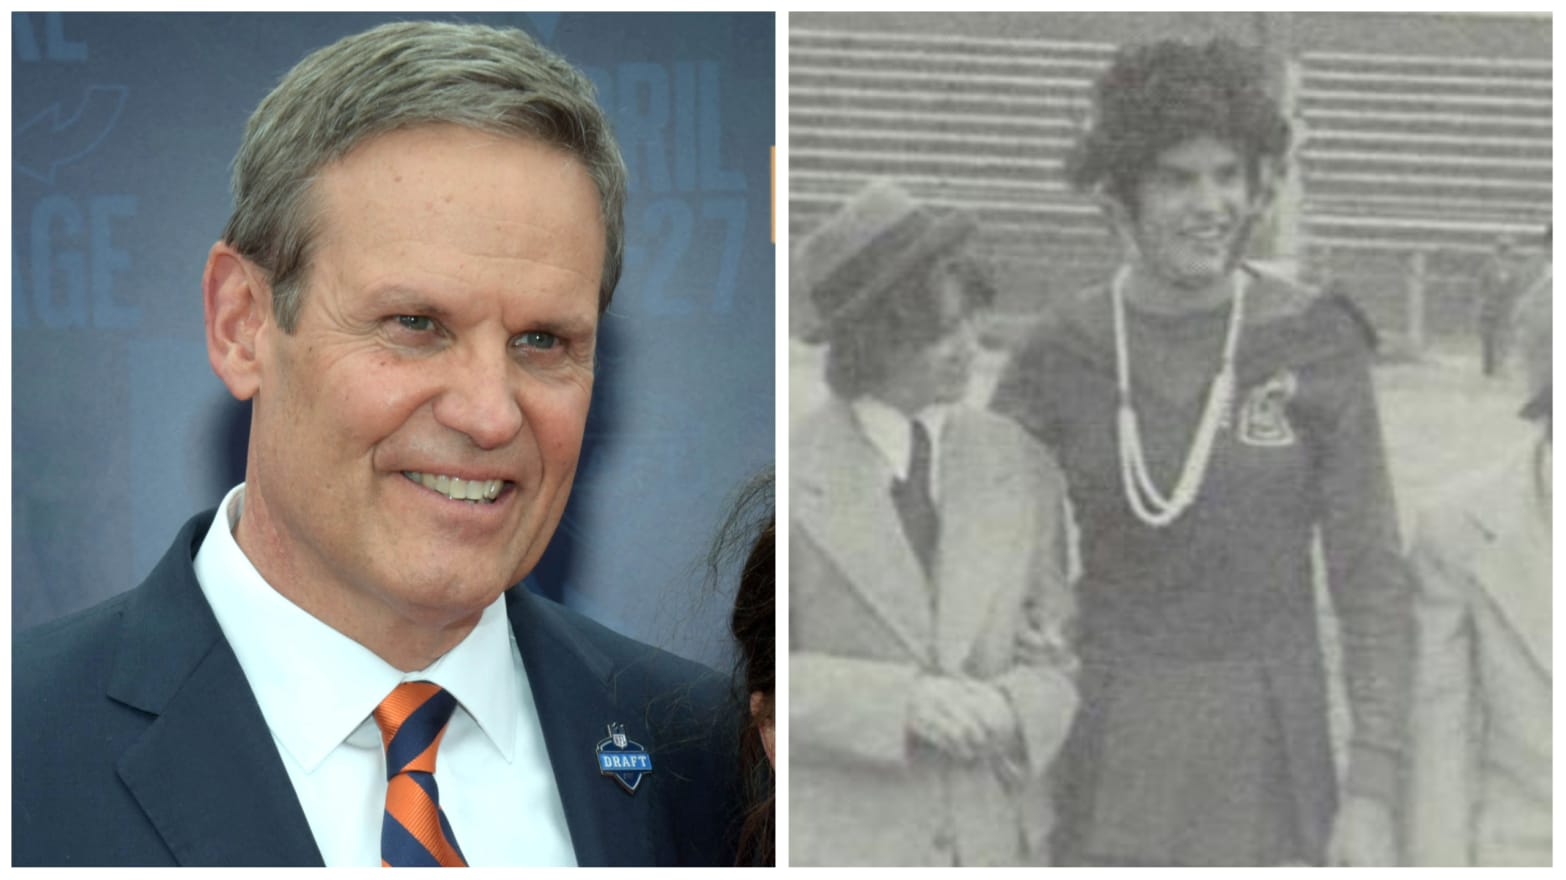 Drag-Banning Tennessee Guv Bill Lee Shrugs Off Old Drag Pic as a  'Lighthearted Tradition'